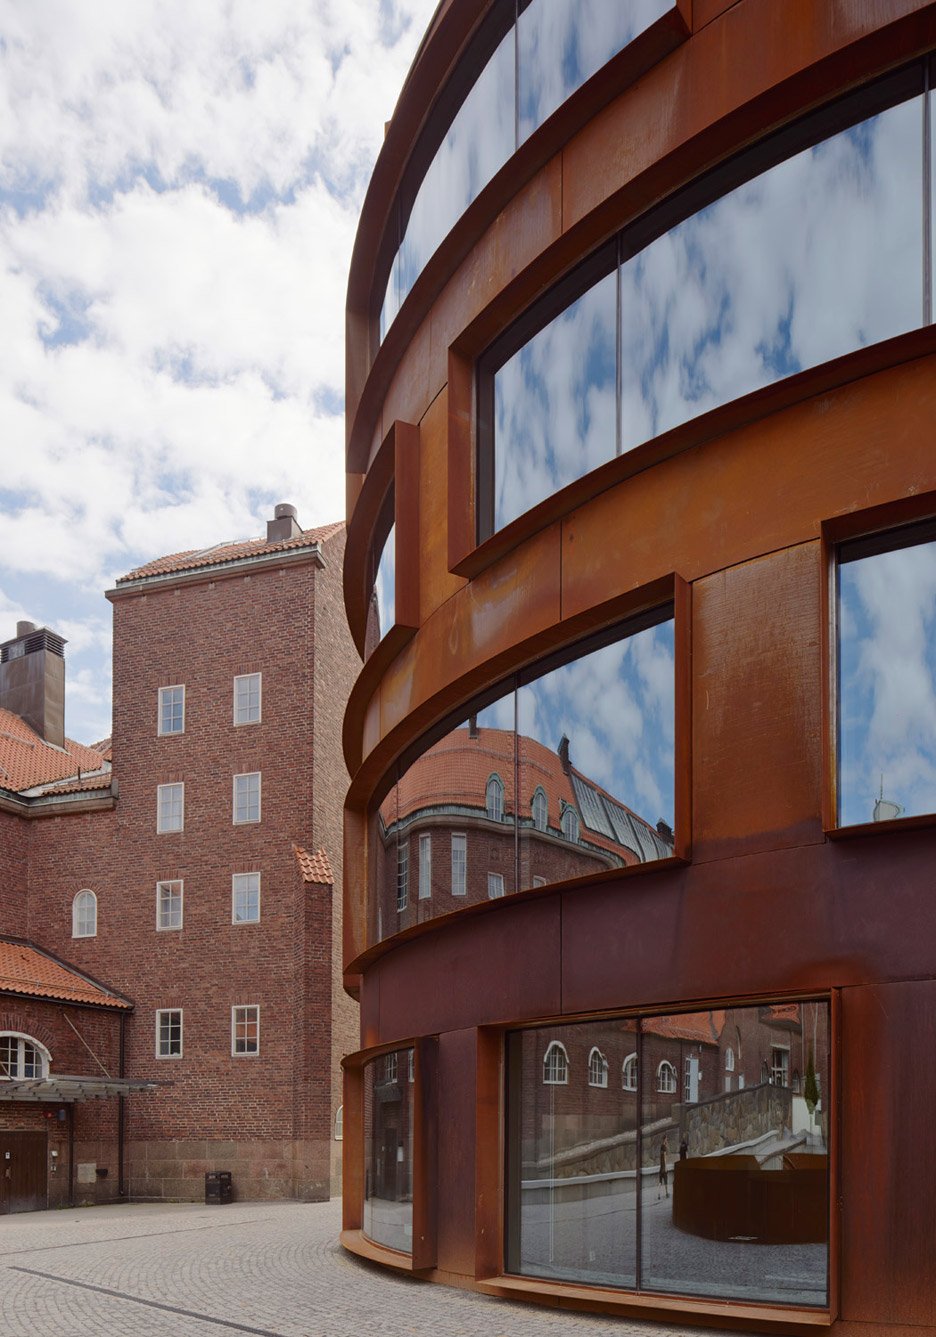 KTH School of Architecture by Tham and Videgard